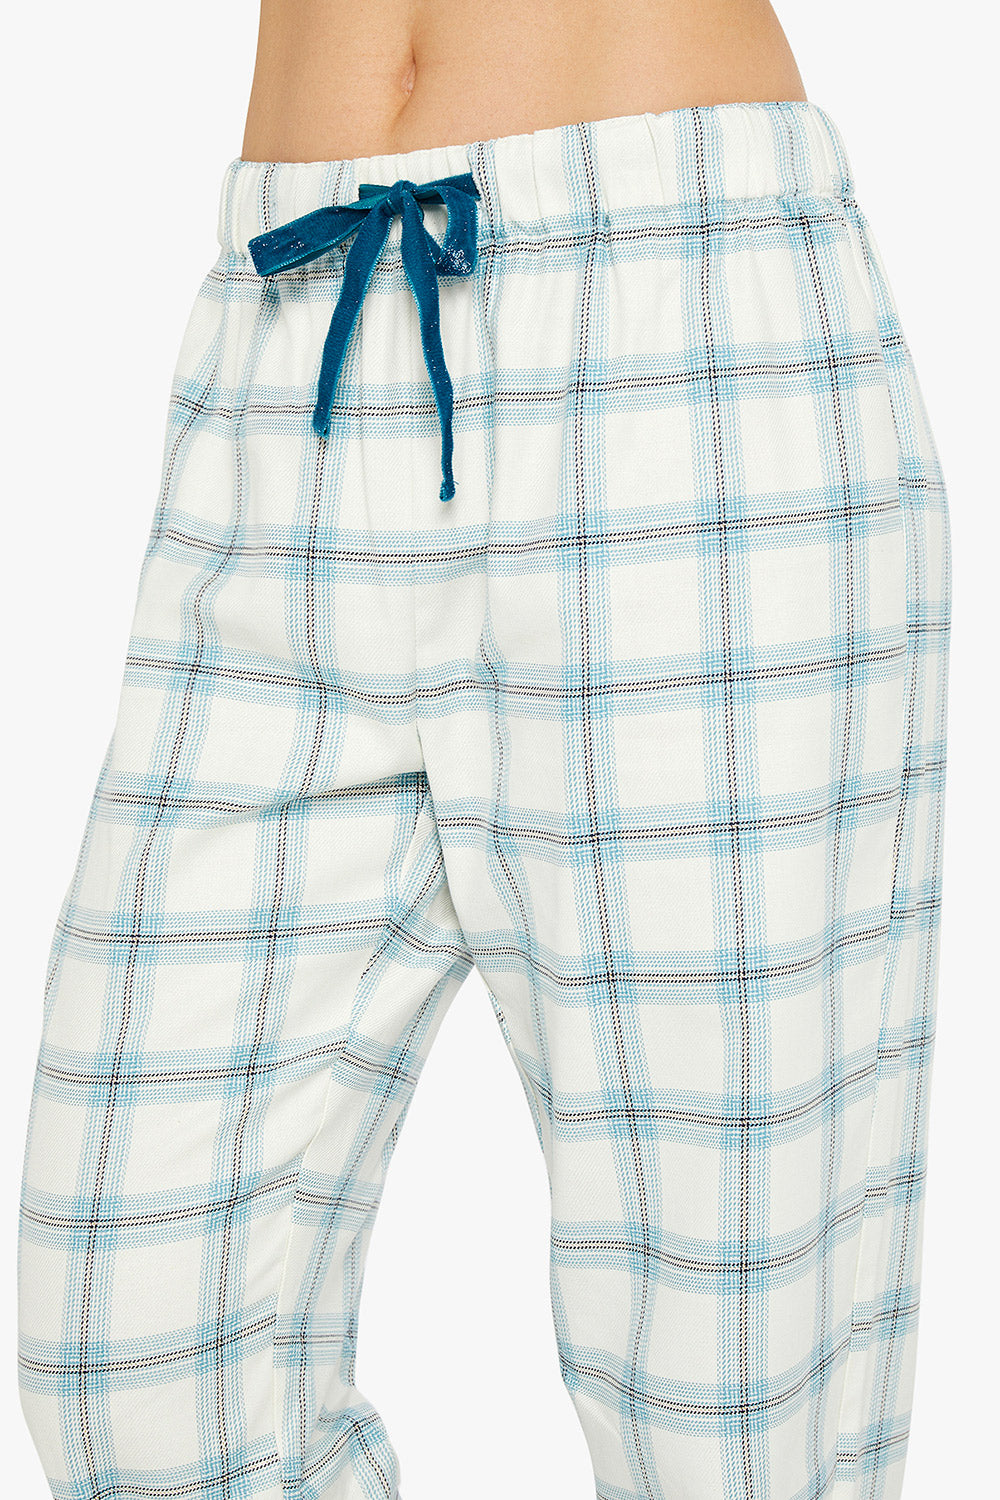 Maryline Buttoned Flannel Pajama Set